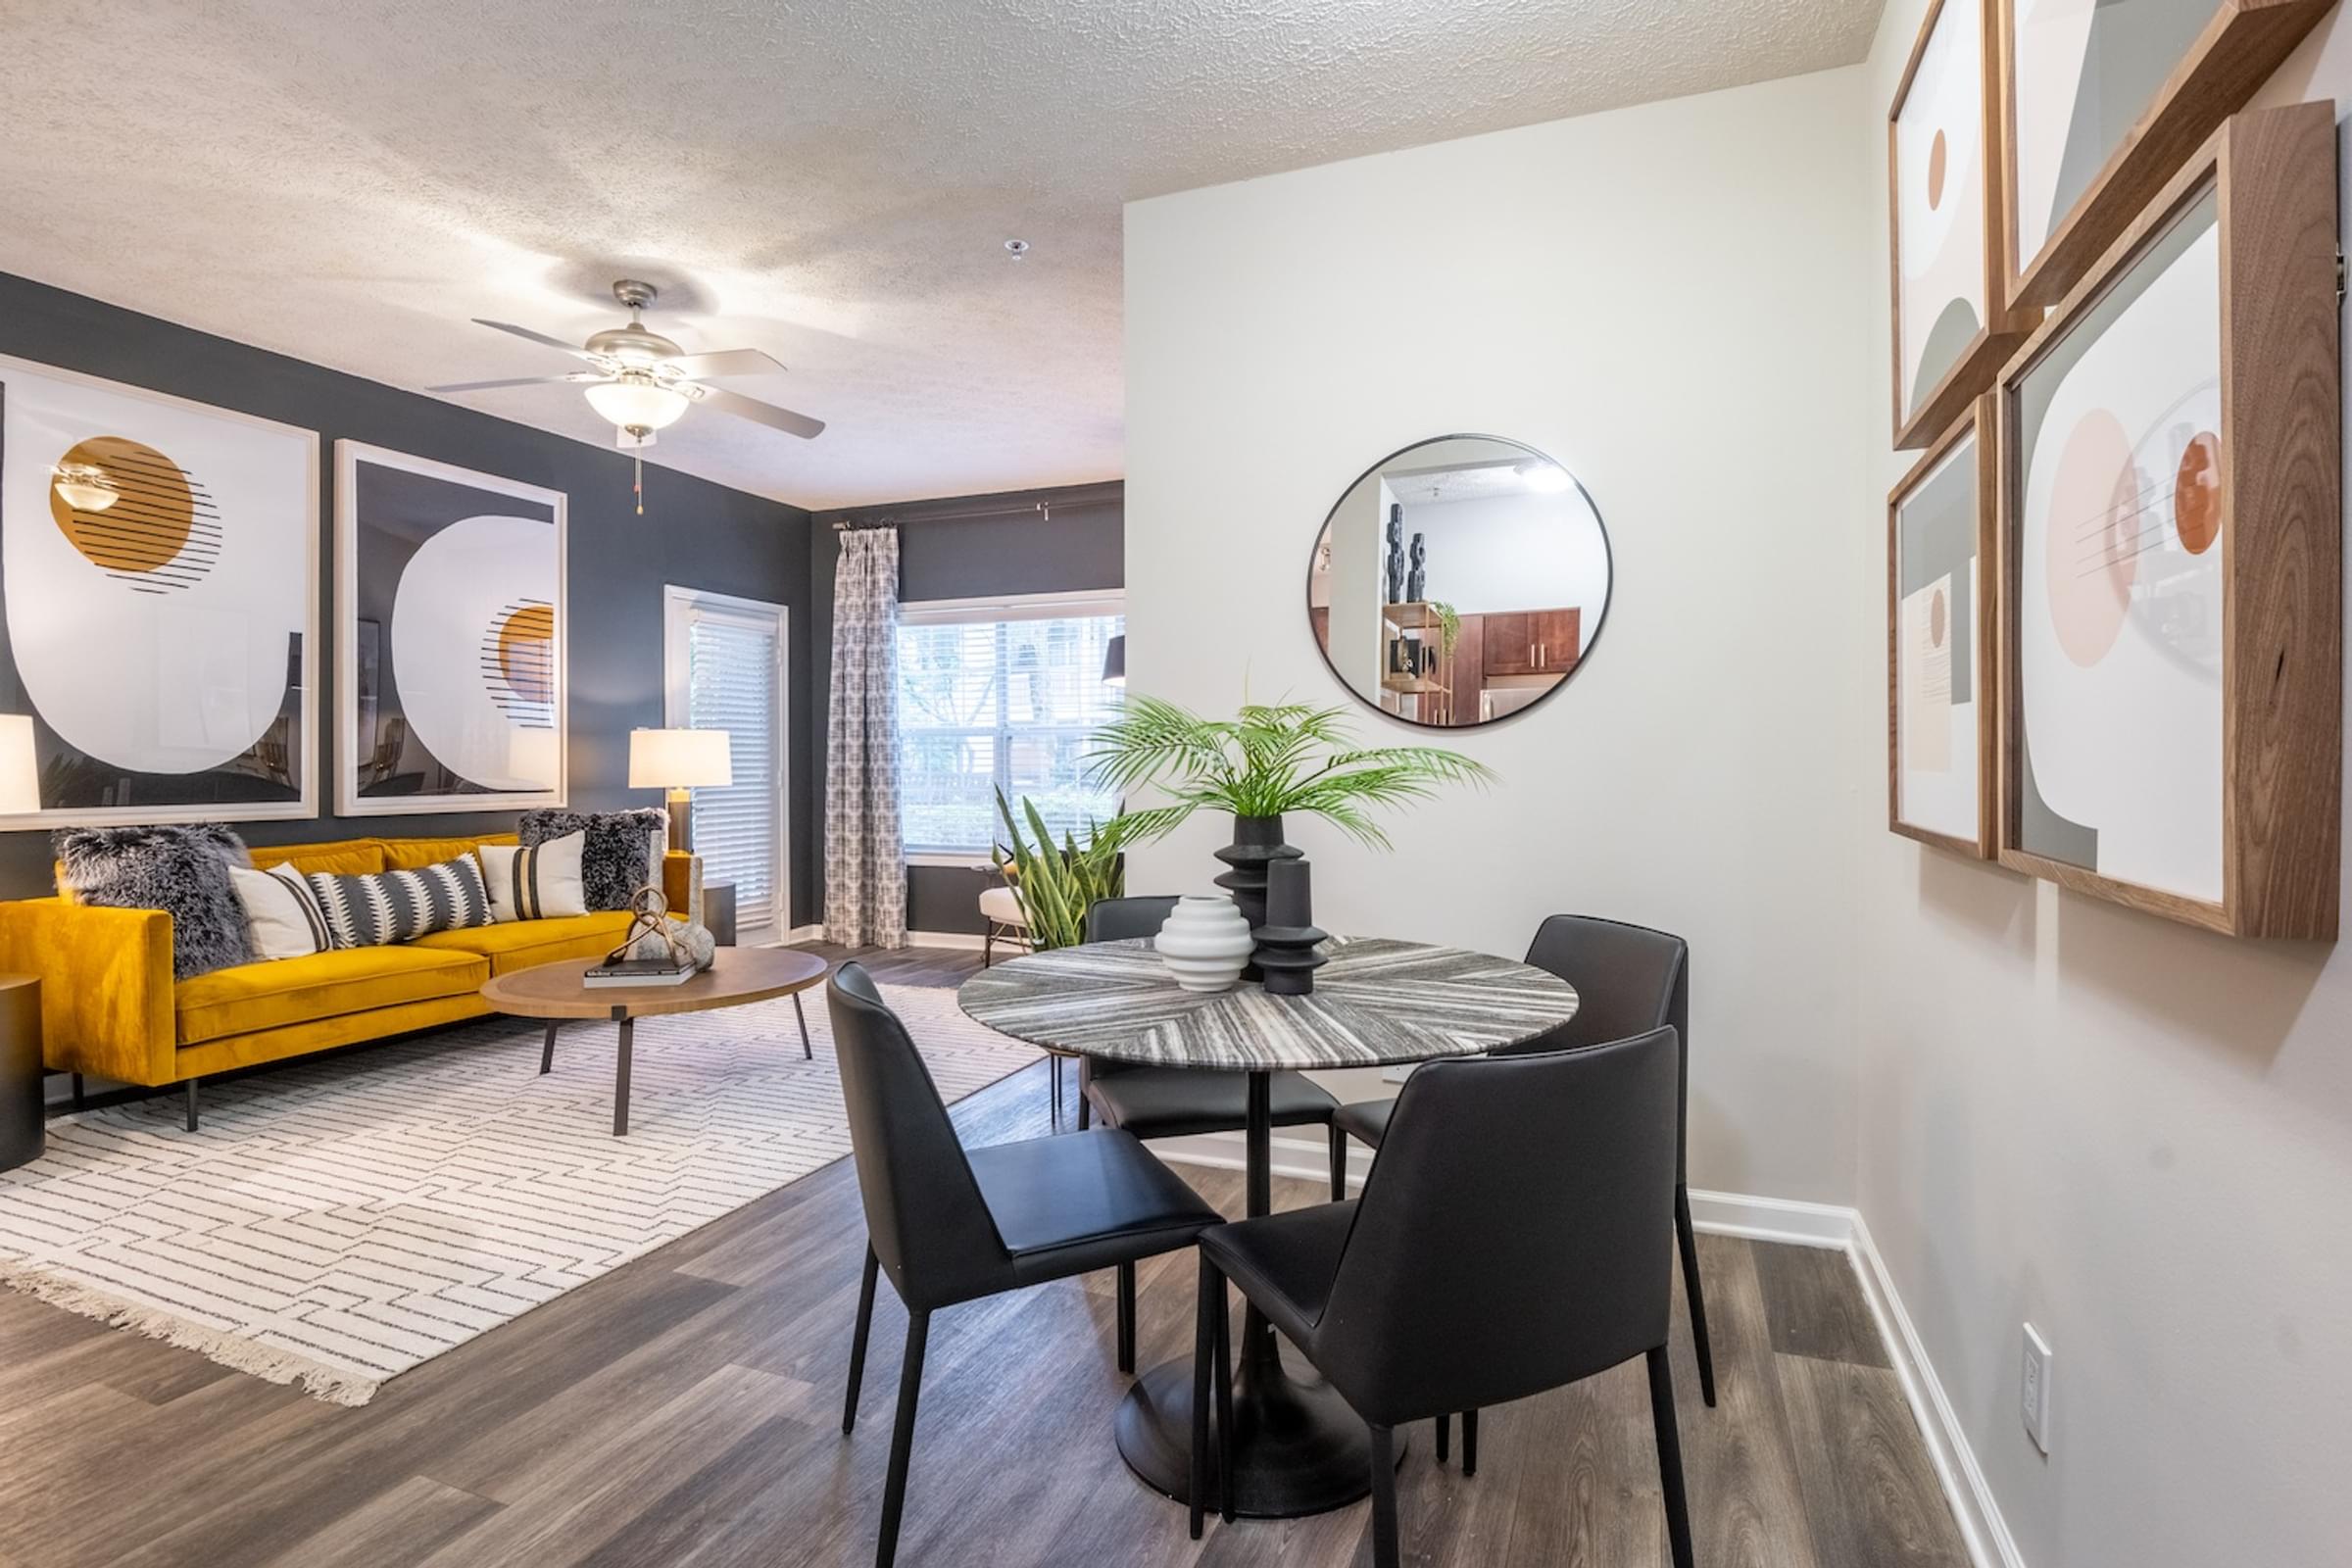 our apartments offer a living room with a dining room table and chairs